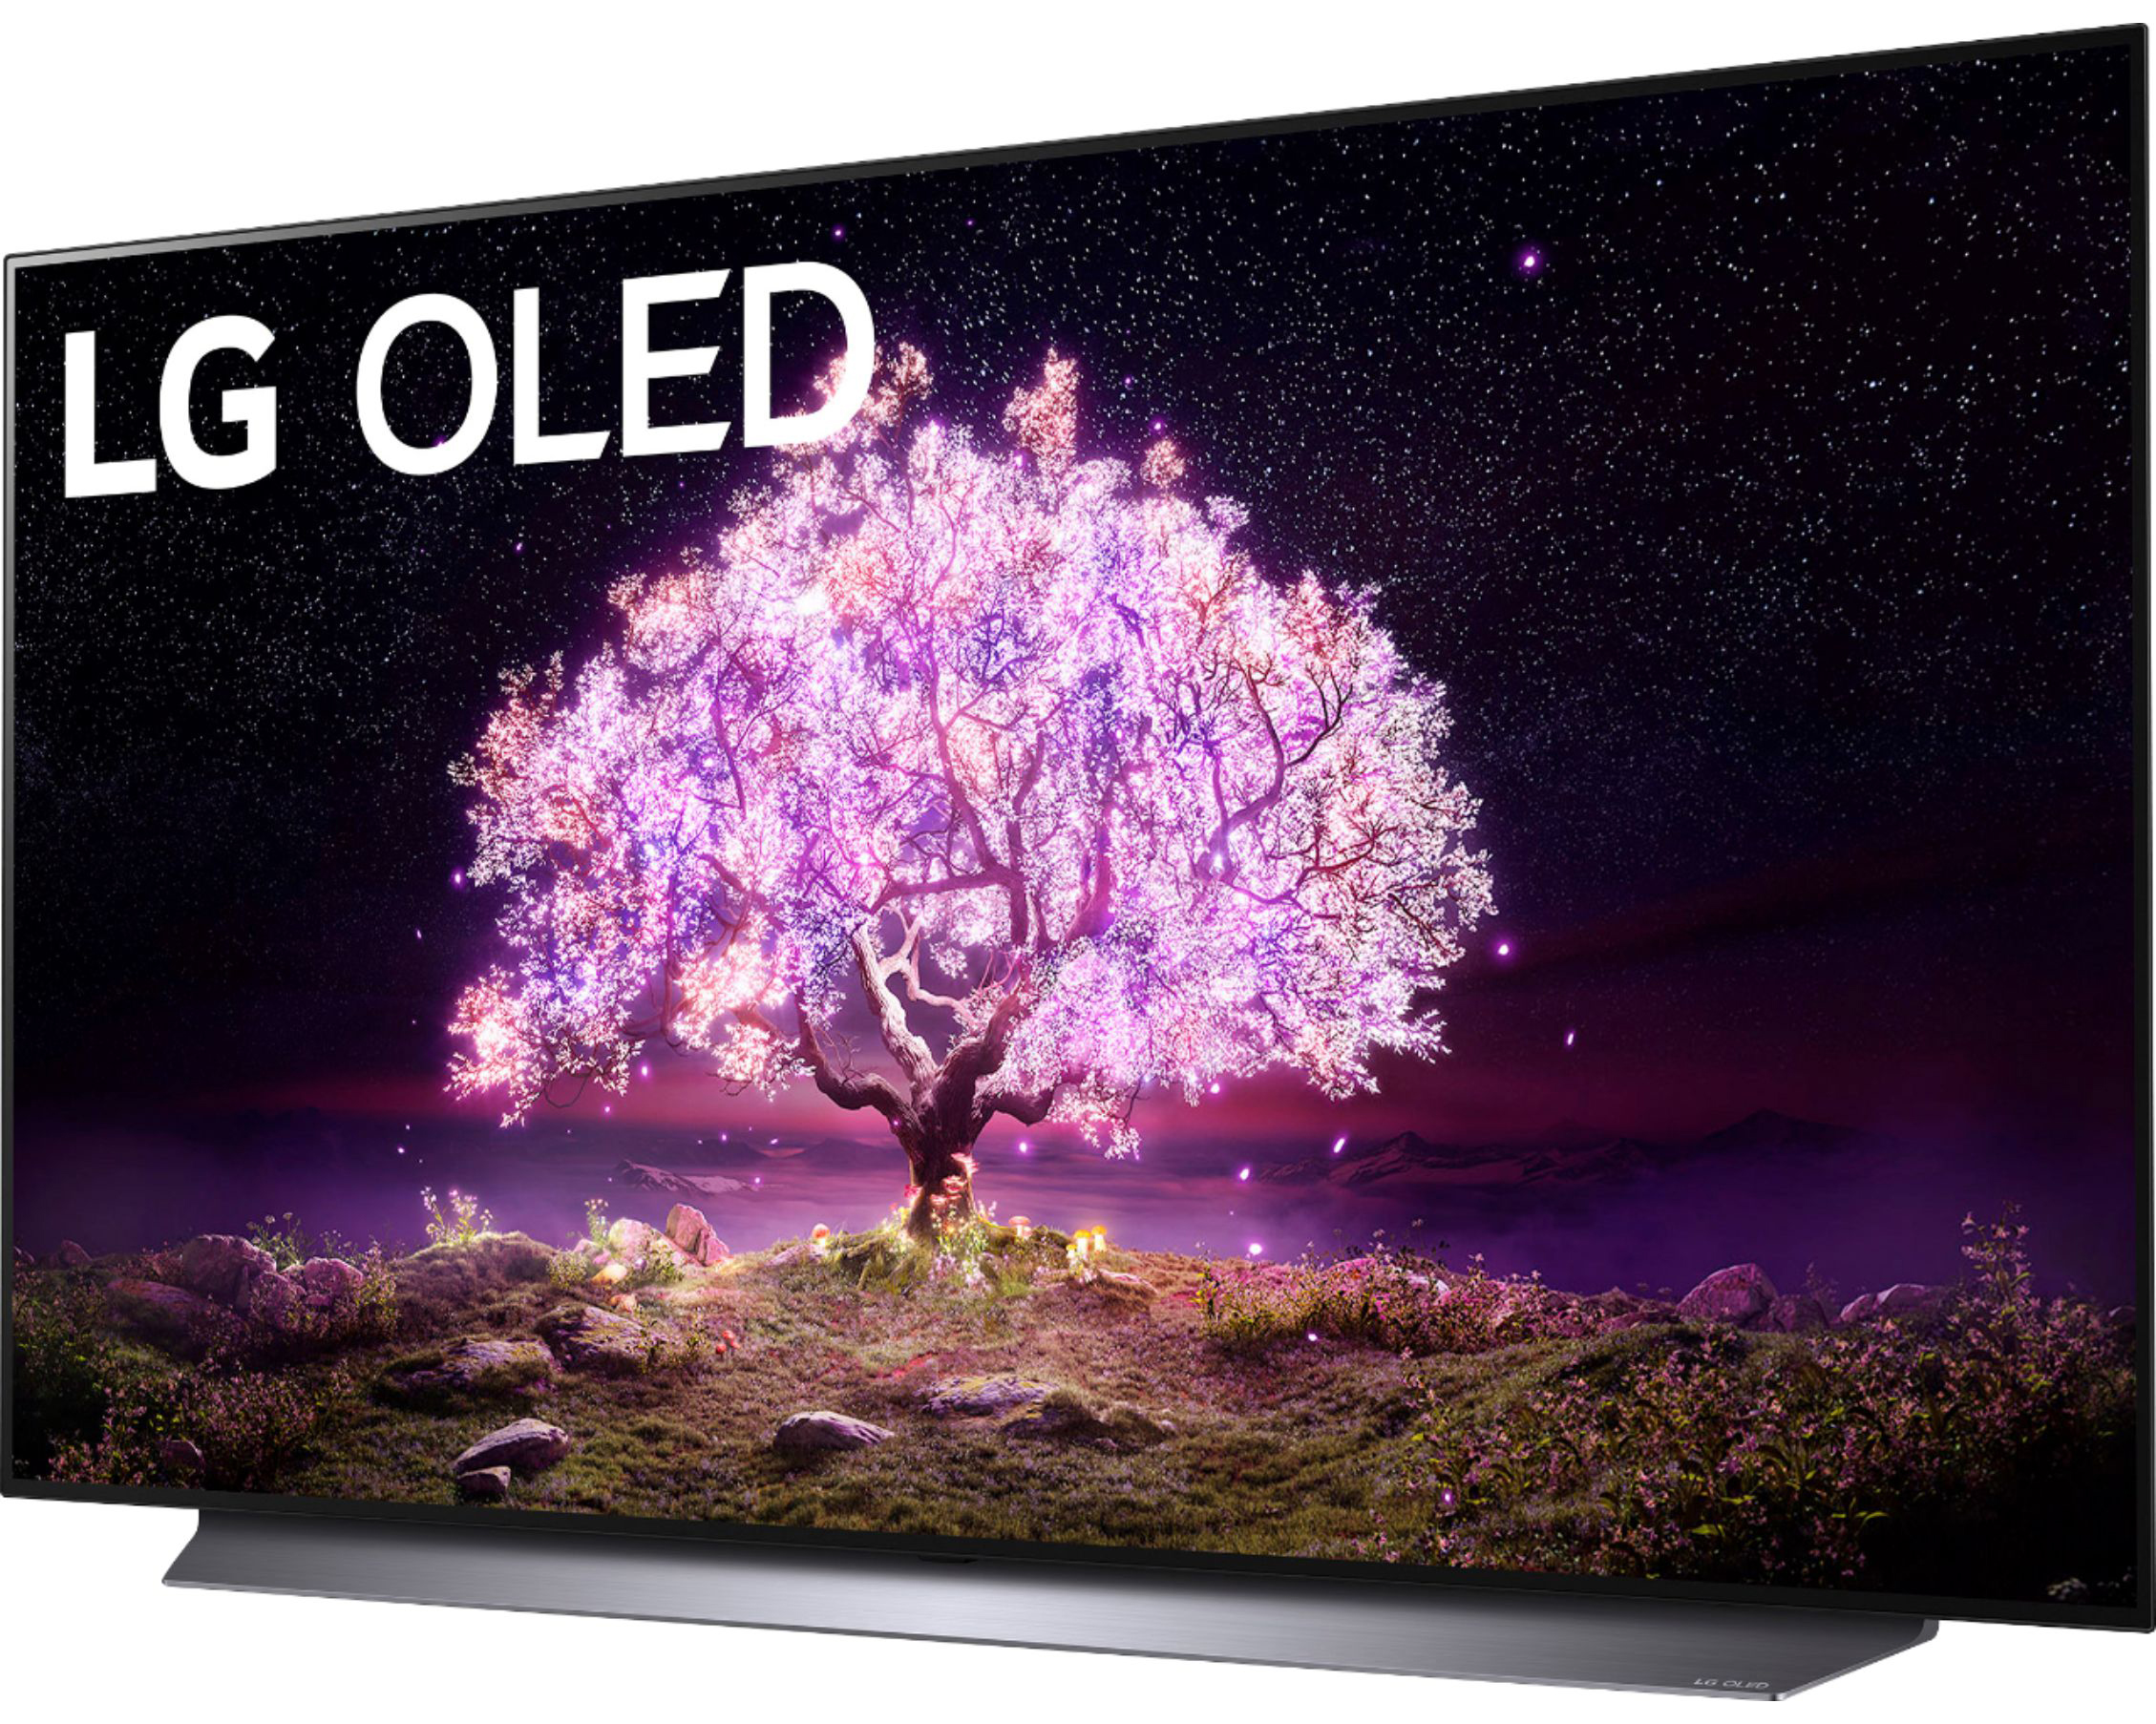 The LG 55 Class C1 Series OLED 4K UHD Smart TV on a white background.